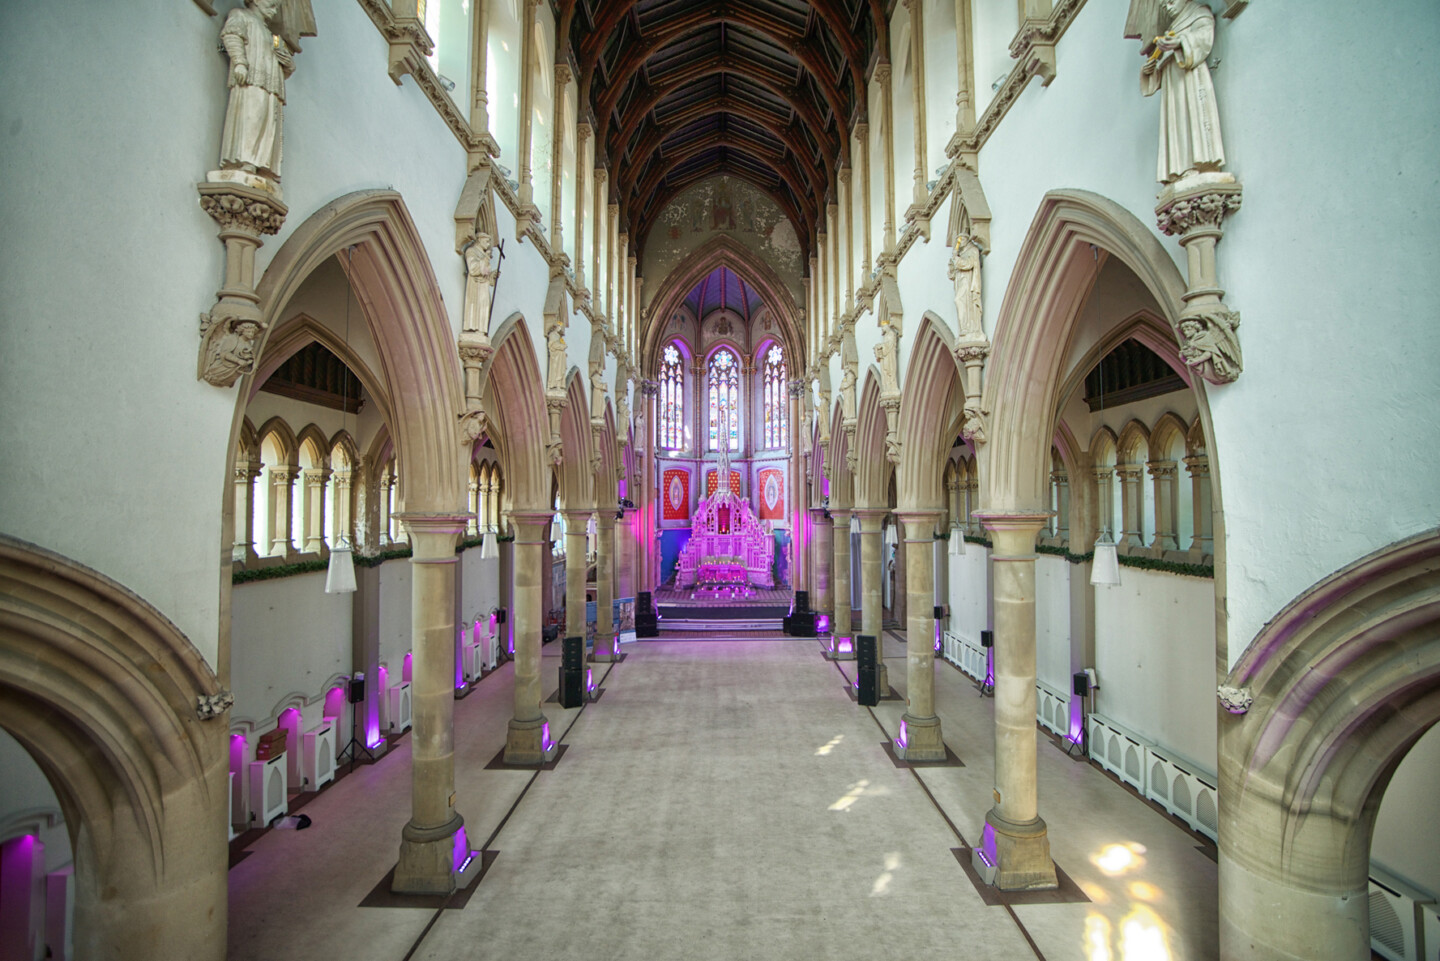 The Monastery, Gorton, Manchester - The Great Nave